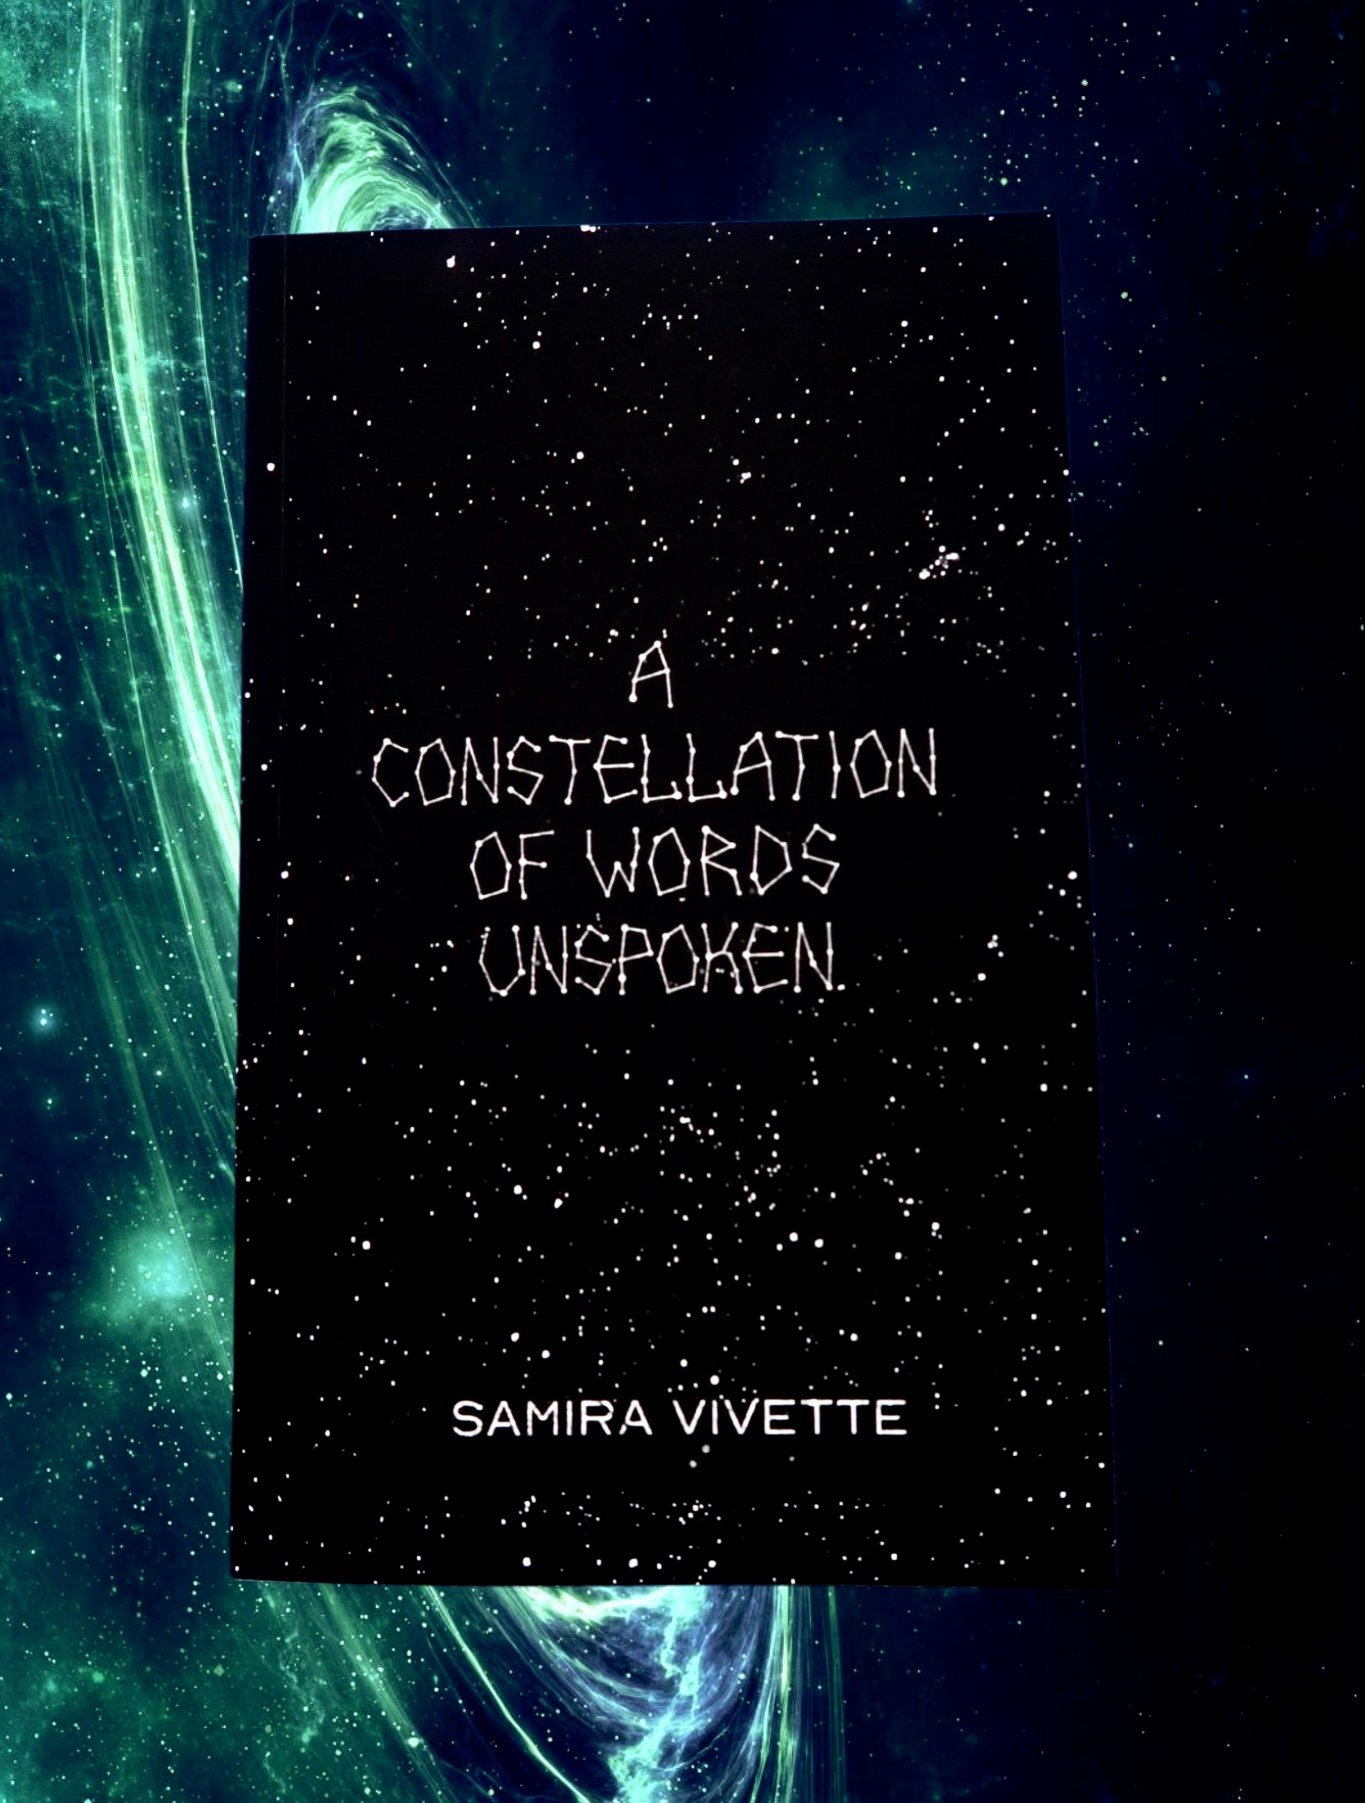 "A Constellation of Words Unspoken" Signed Copy